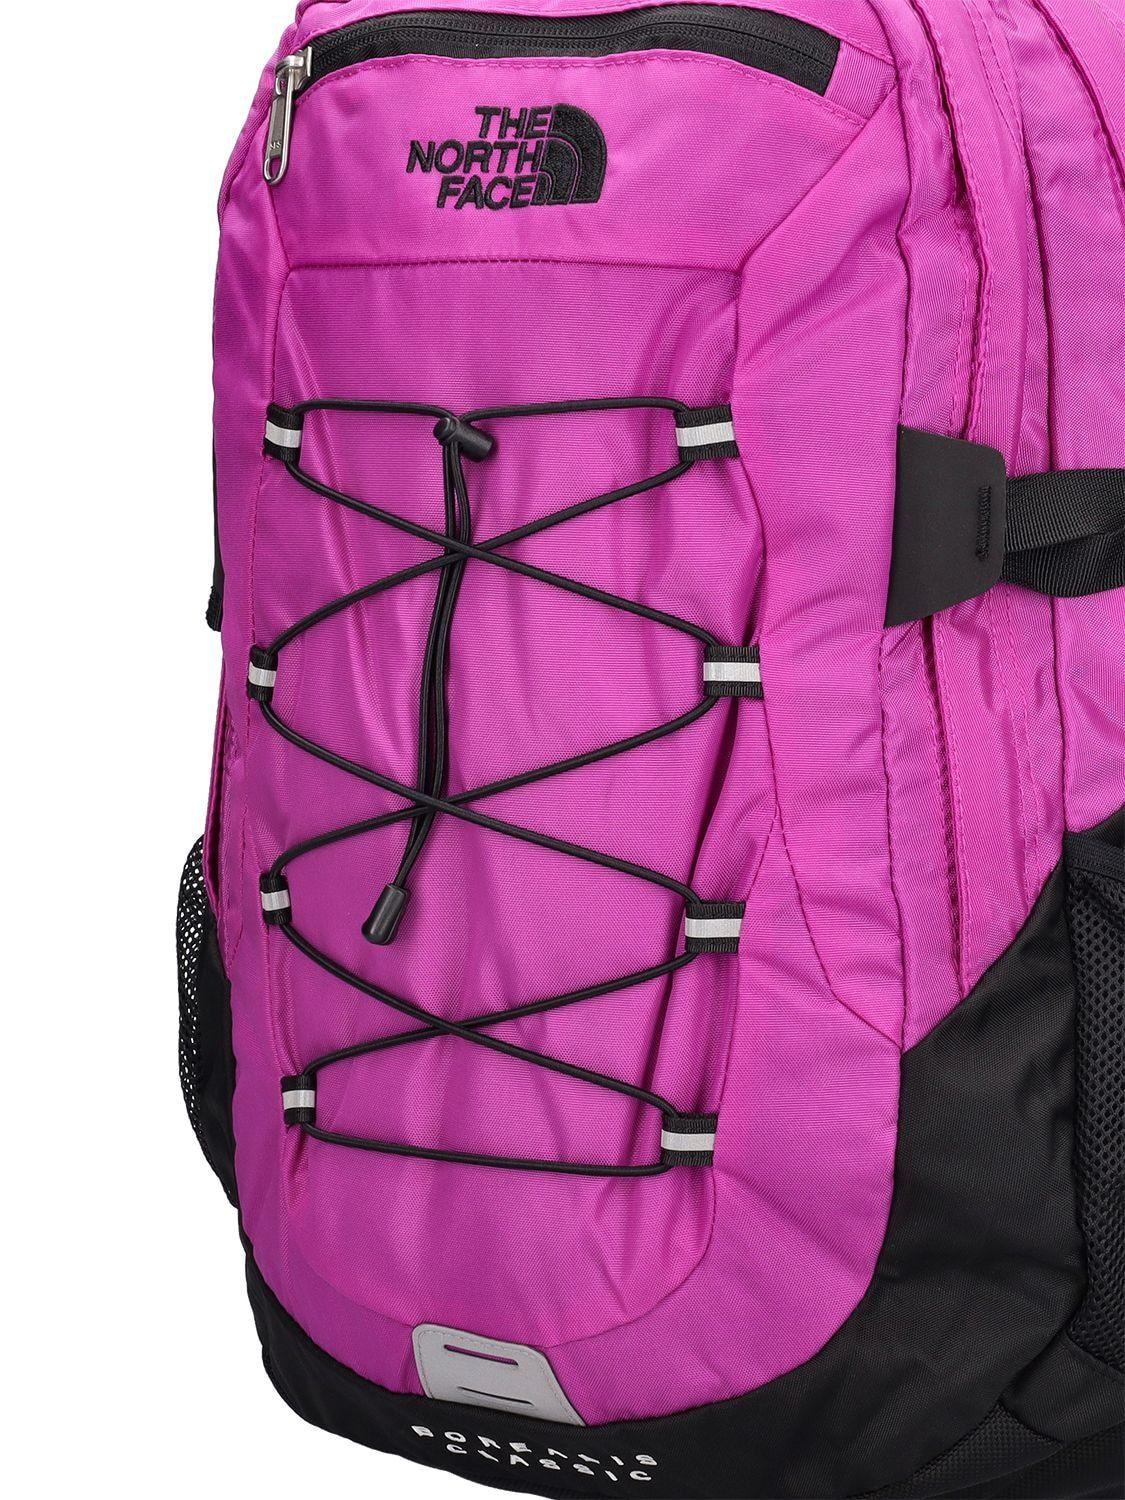 The North Face 29l Borealis Classic Nylon Backpack in Pink | Lyst